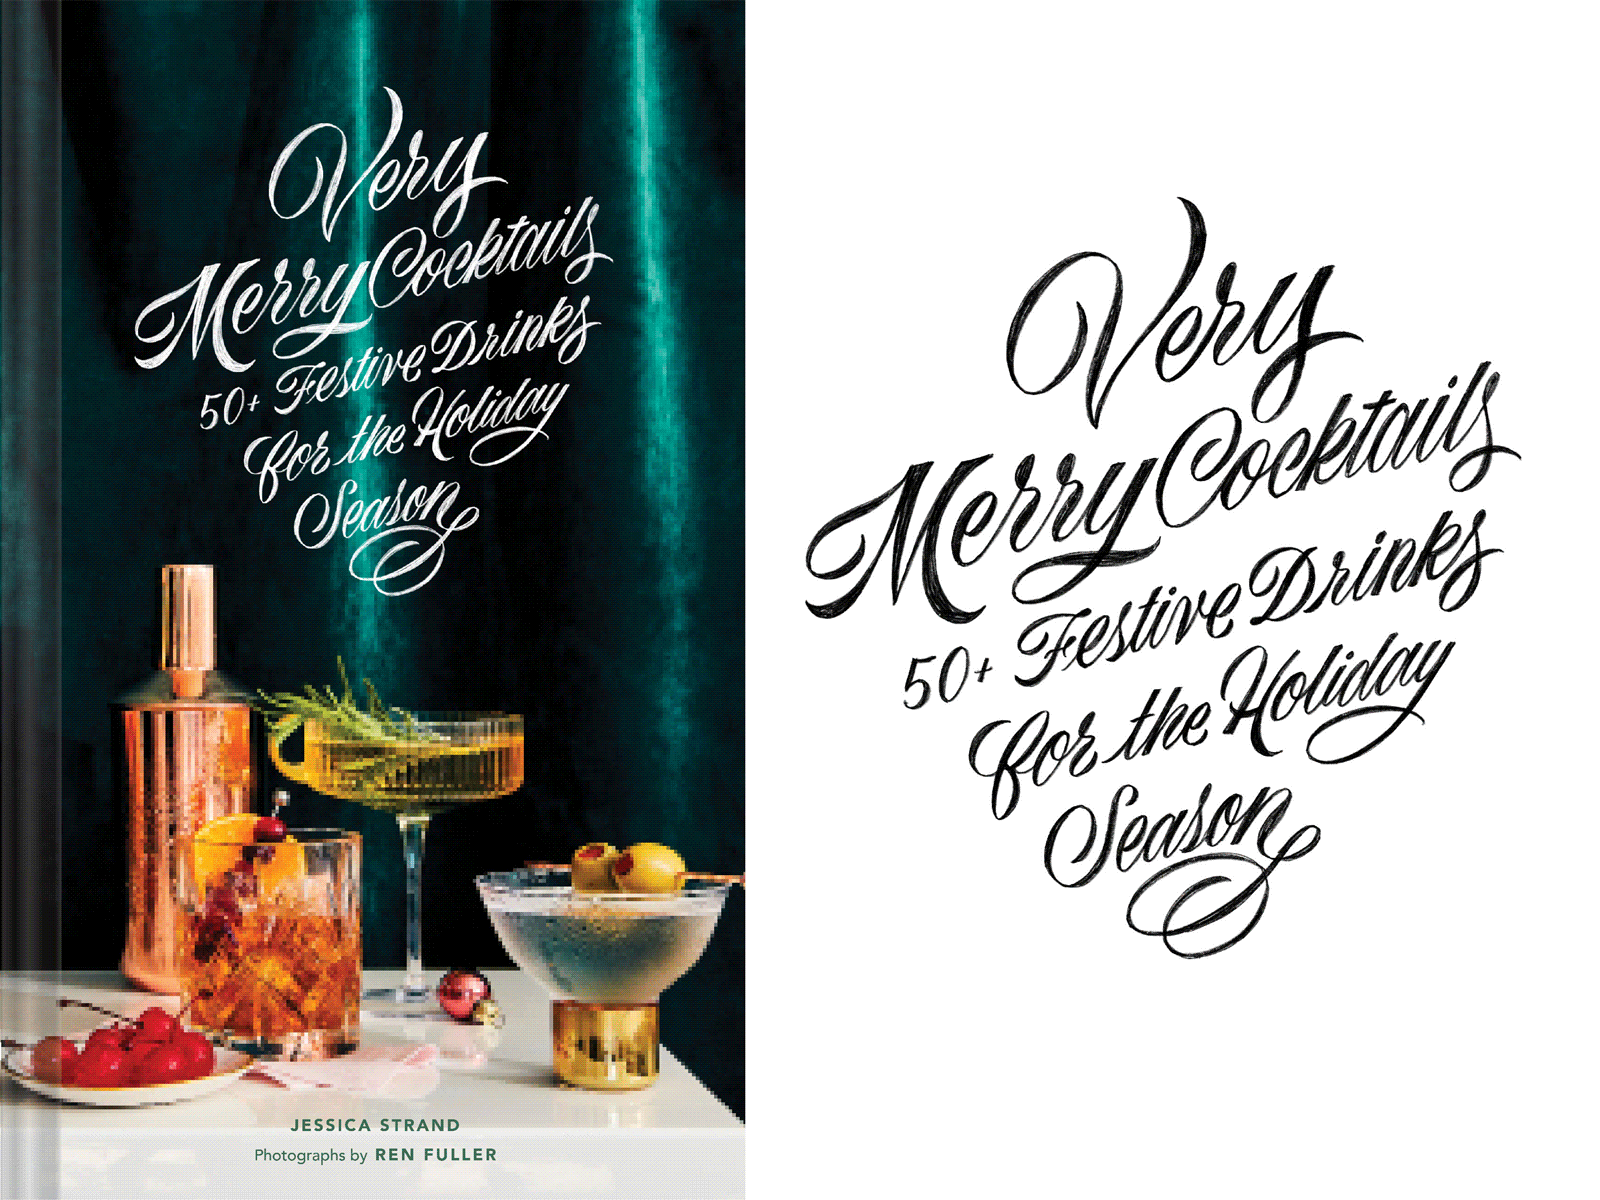 Very Merry Cocktails bar cheer chronicle books cocktails design gift guide gifts happy holidays holiday lettering menu merry merry christmas merry xmas script typography